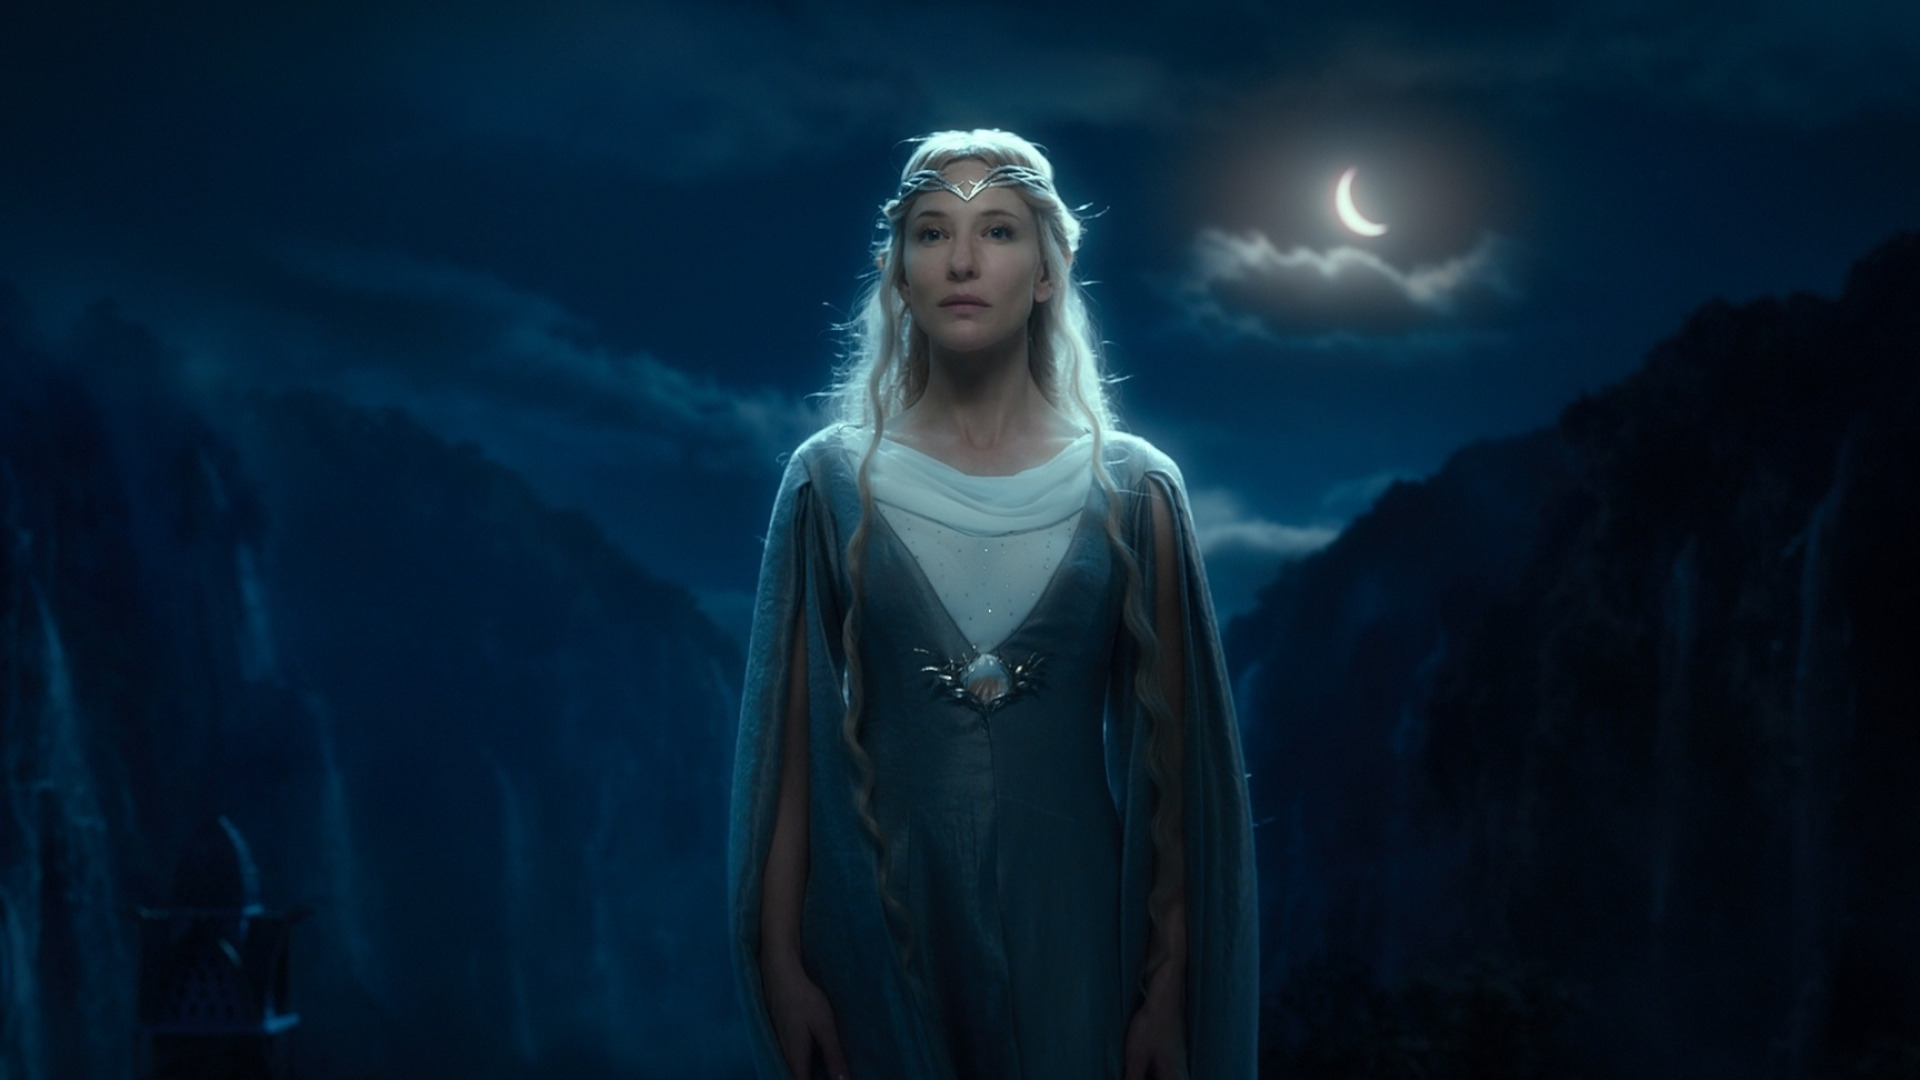 Galadriel in The Hobbit, Cinematic wallpaper, Mysterious and wise, An Unexpected Journey, 1920x1080 Full HD Desktop